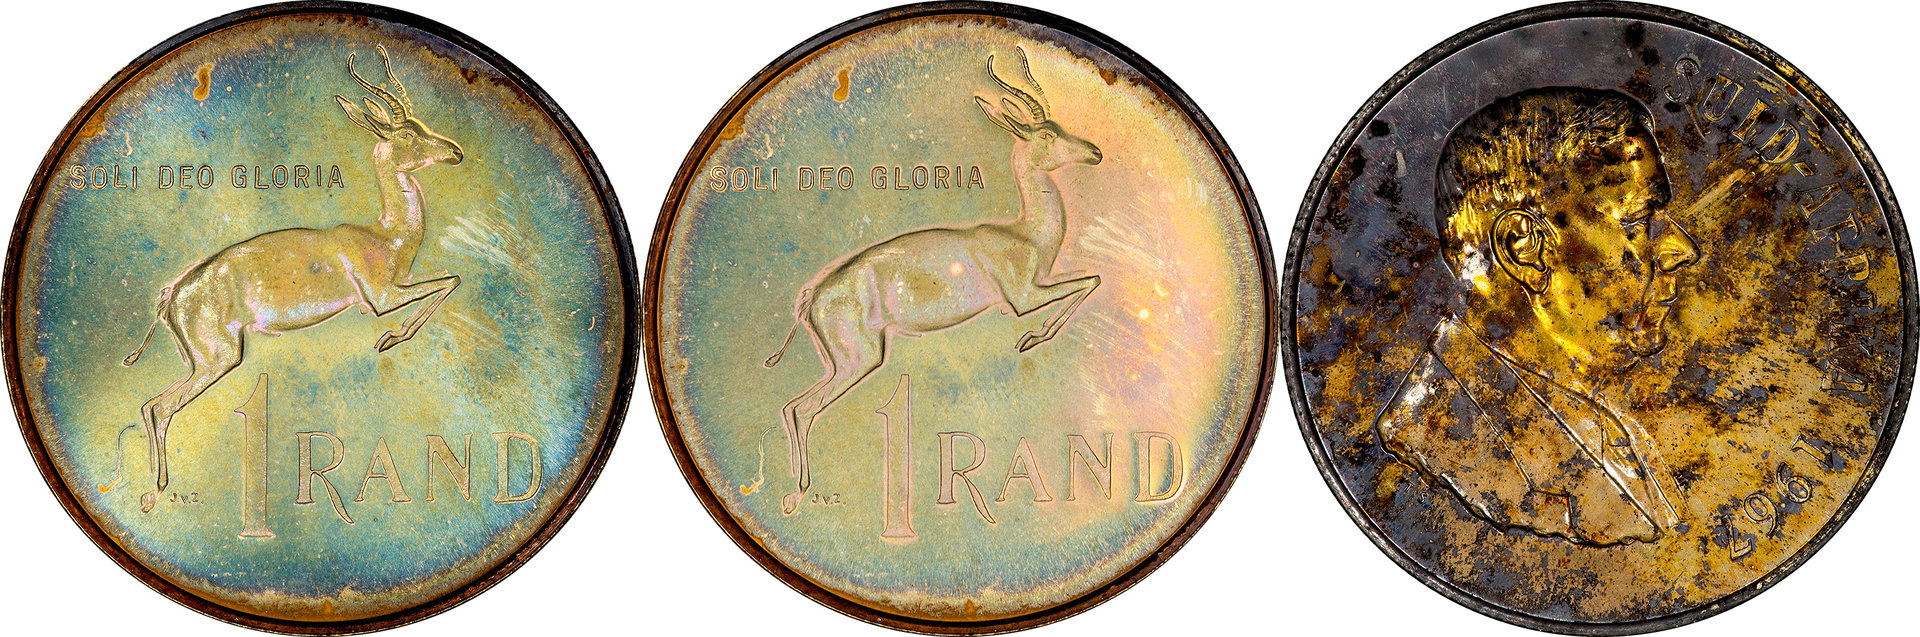 South Africa - 1967 Proof 1 Rand.jpg